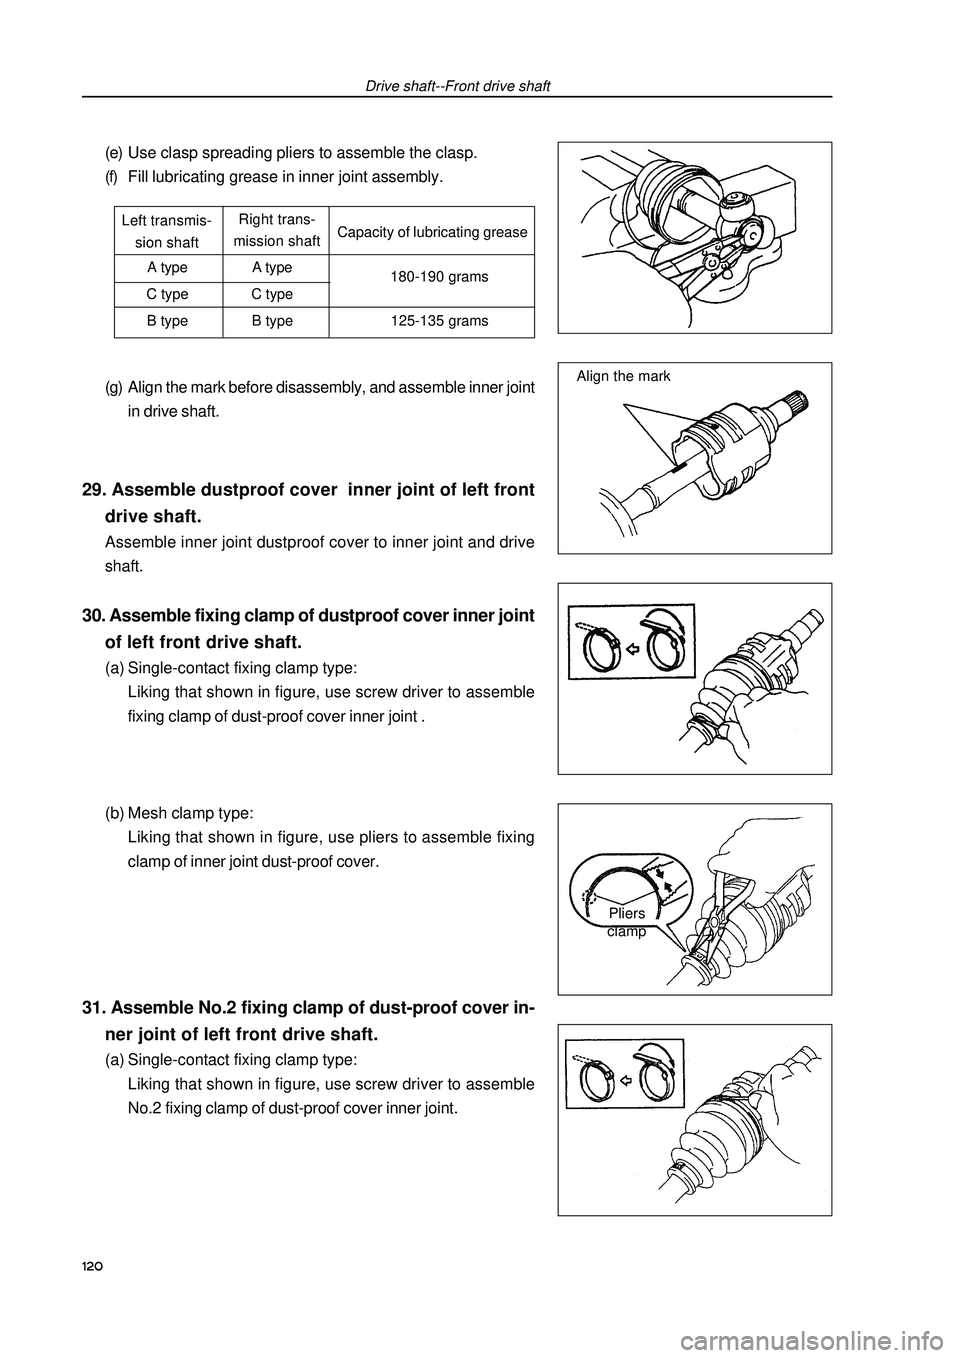 GEELY FC 2008  Workshop Manual Drive shaft--Front drive shaft(e) Use clasp spreading pliers to assemble the clasp.
(f) Fill lubricating grease in inner joint assembly.
(g) Align the mark before disassembly, and assemble inner joint